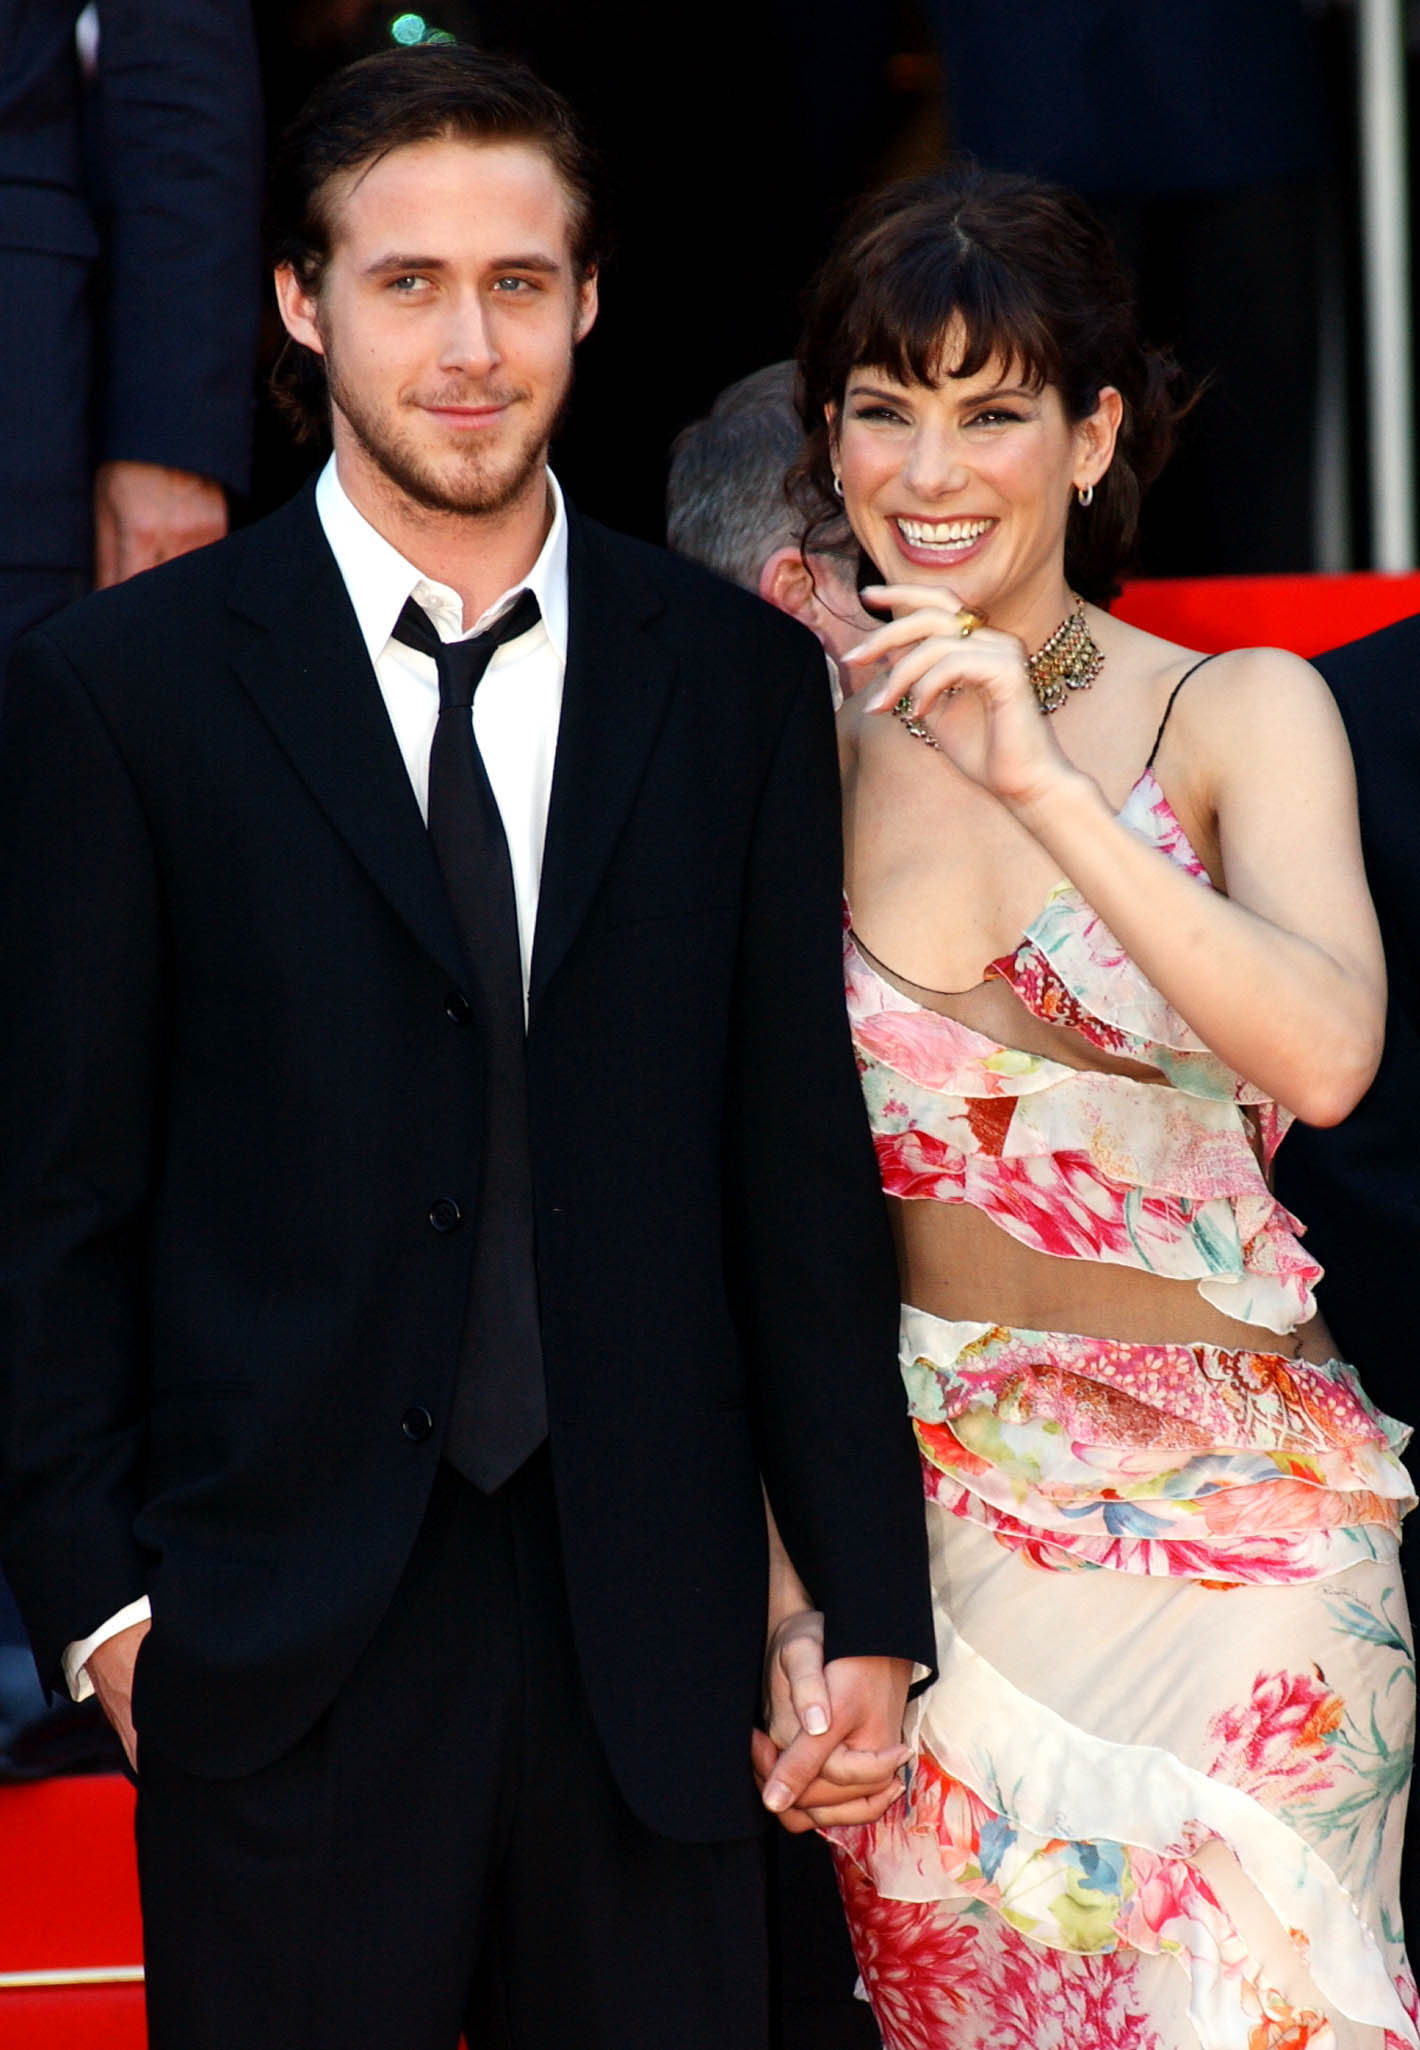 Ryan Gosling and Sandra Bullock at the Palais des Festival for the premiere of "Murder by Numbers" during the 55th Cannes Film Festival on May 24, 2002 | Source: Getty Images